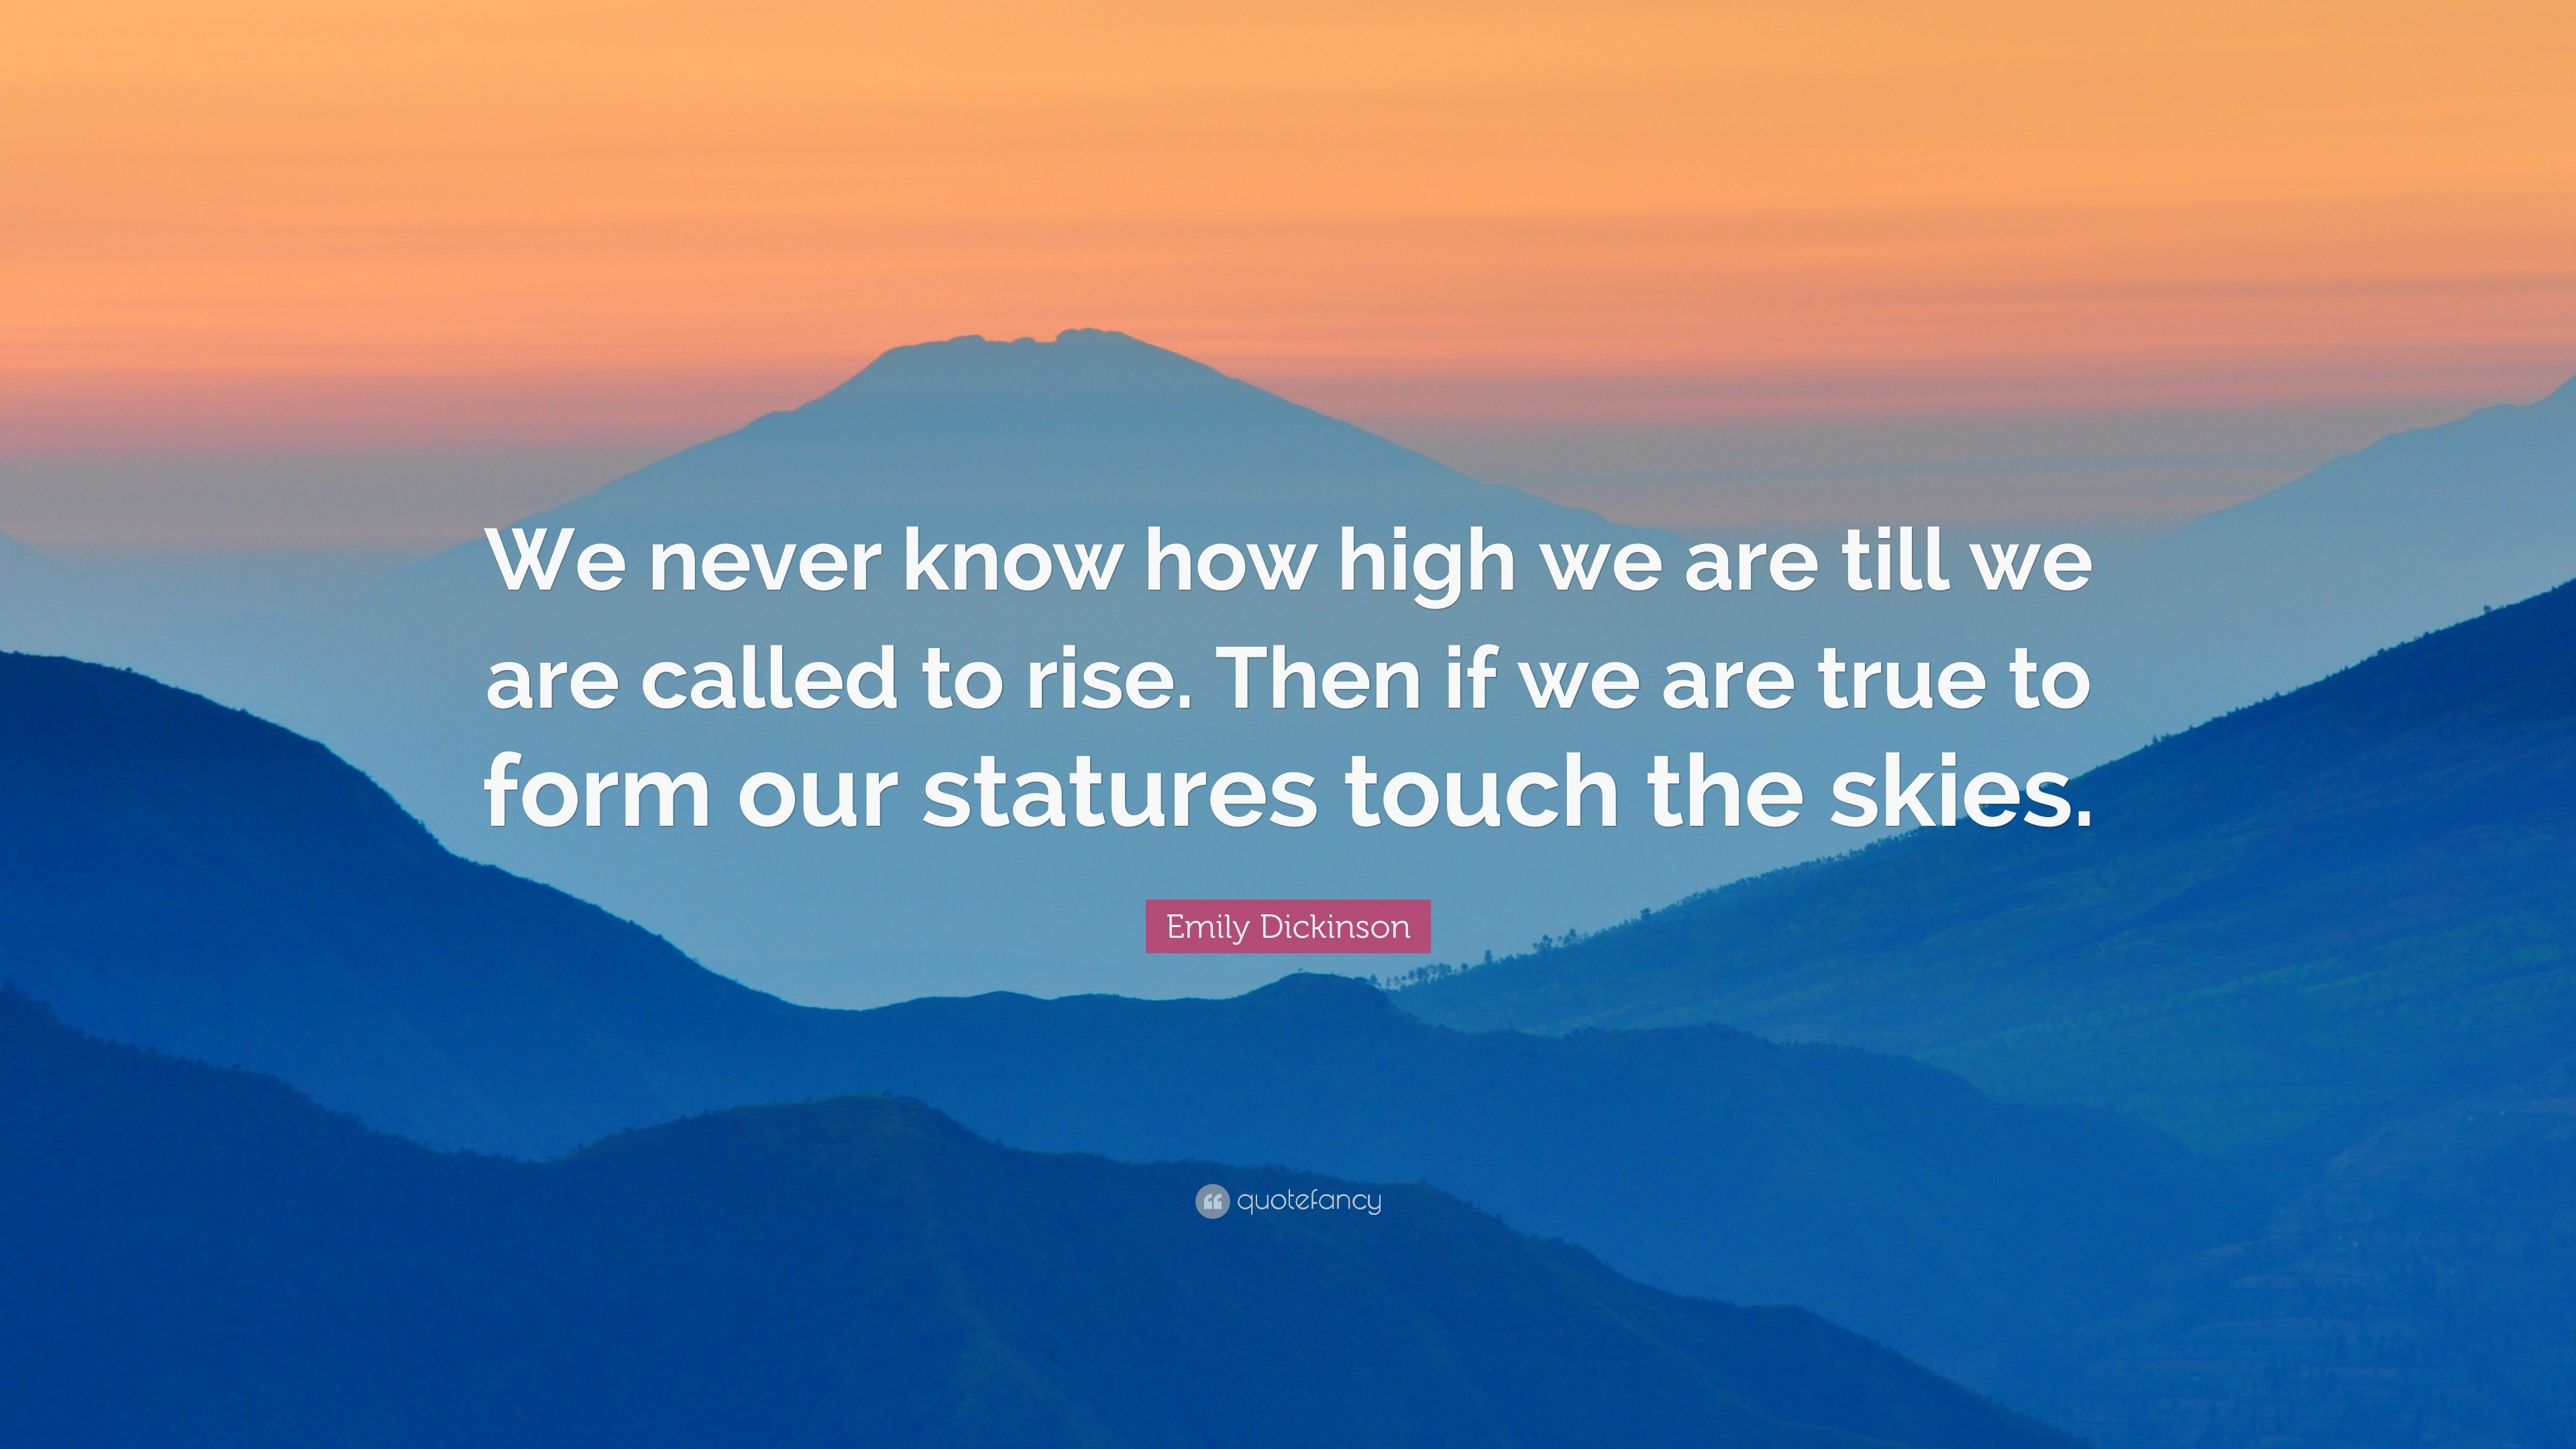 Emily Dickinson Quote: “We never know how high we are till we are ...